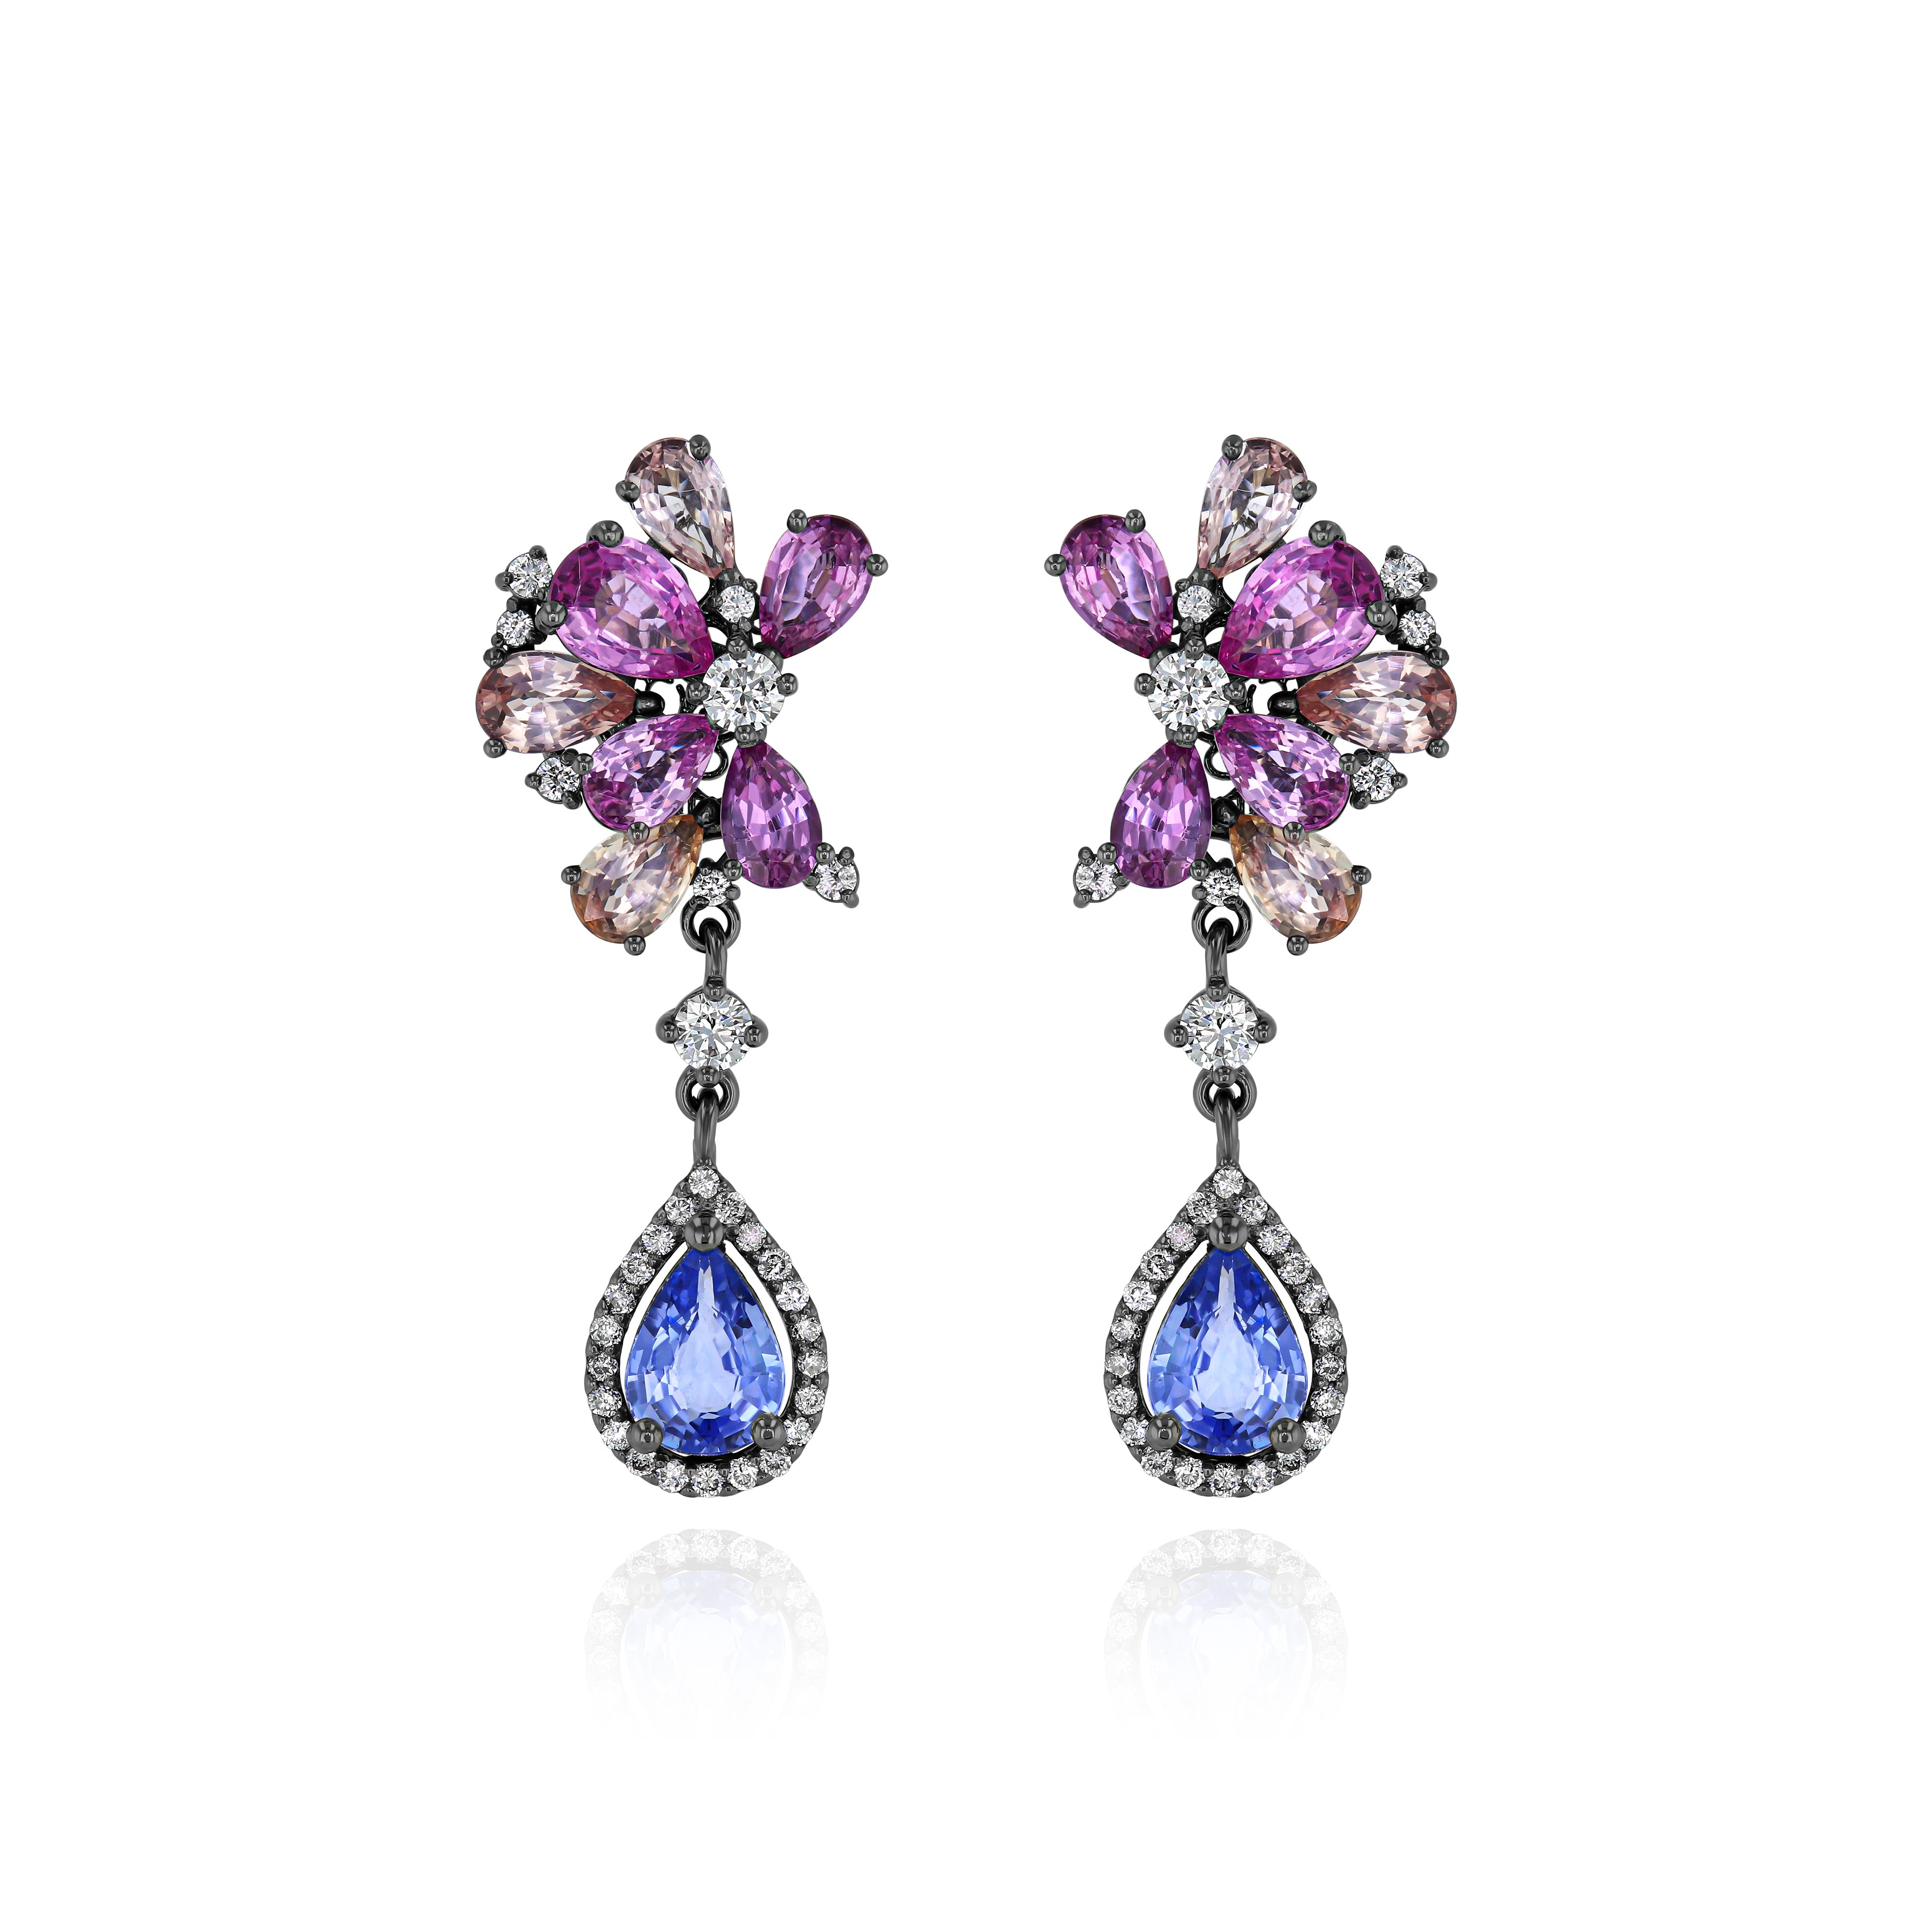 Rhodium Plated Gold Earrings with Pink and Blue Sapphires, and Diamonds, Medium